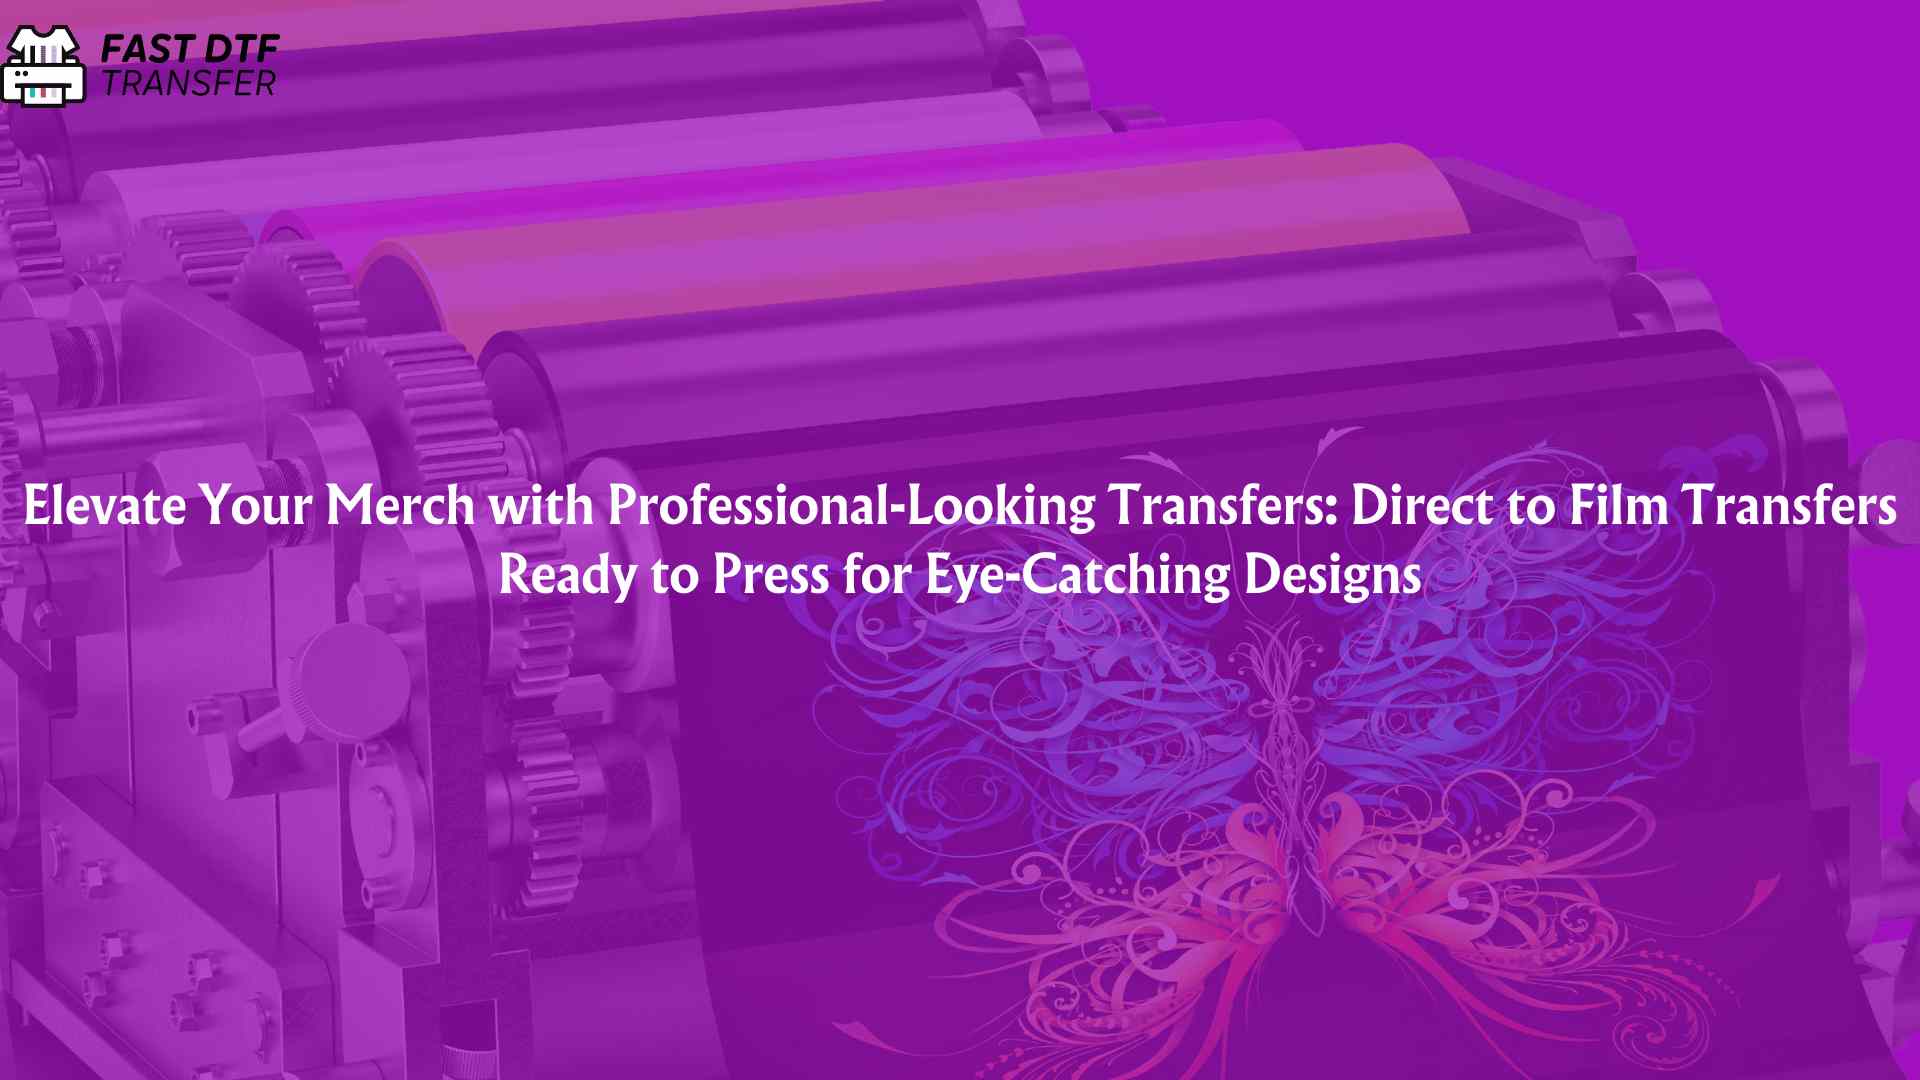 Elevate Your Merch with Professional-Looking Transfers: Direct to Film Transfers Ready to Press for Eye-Catching Designs